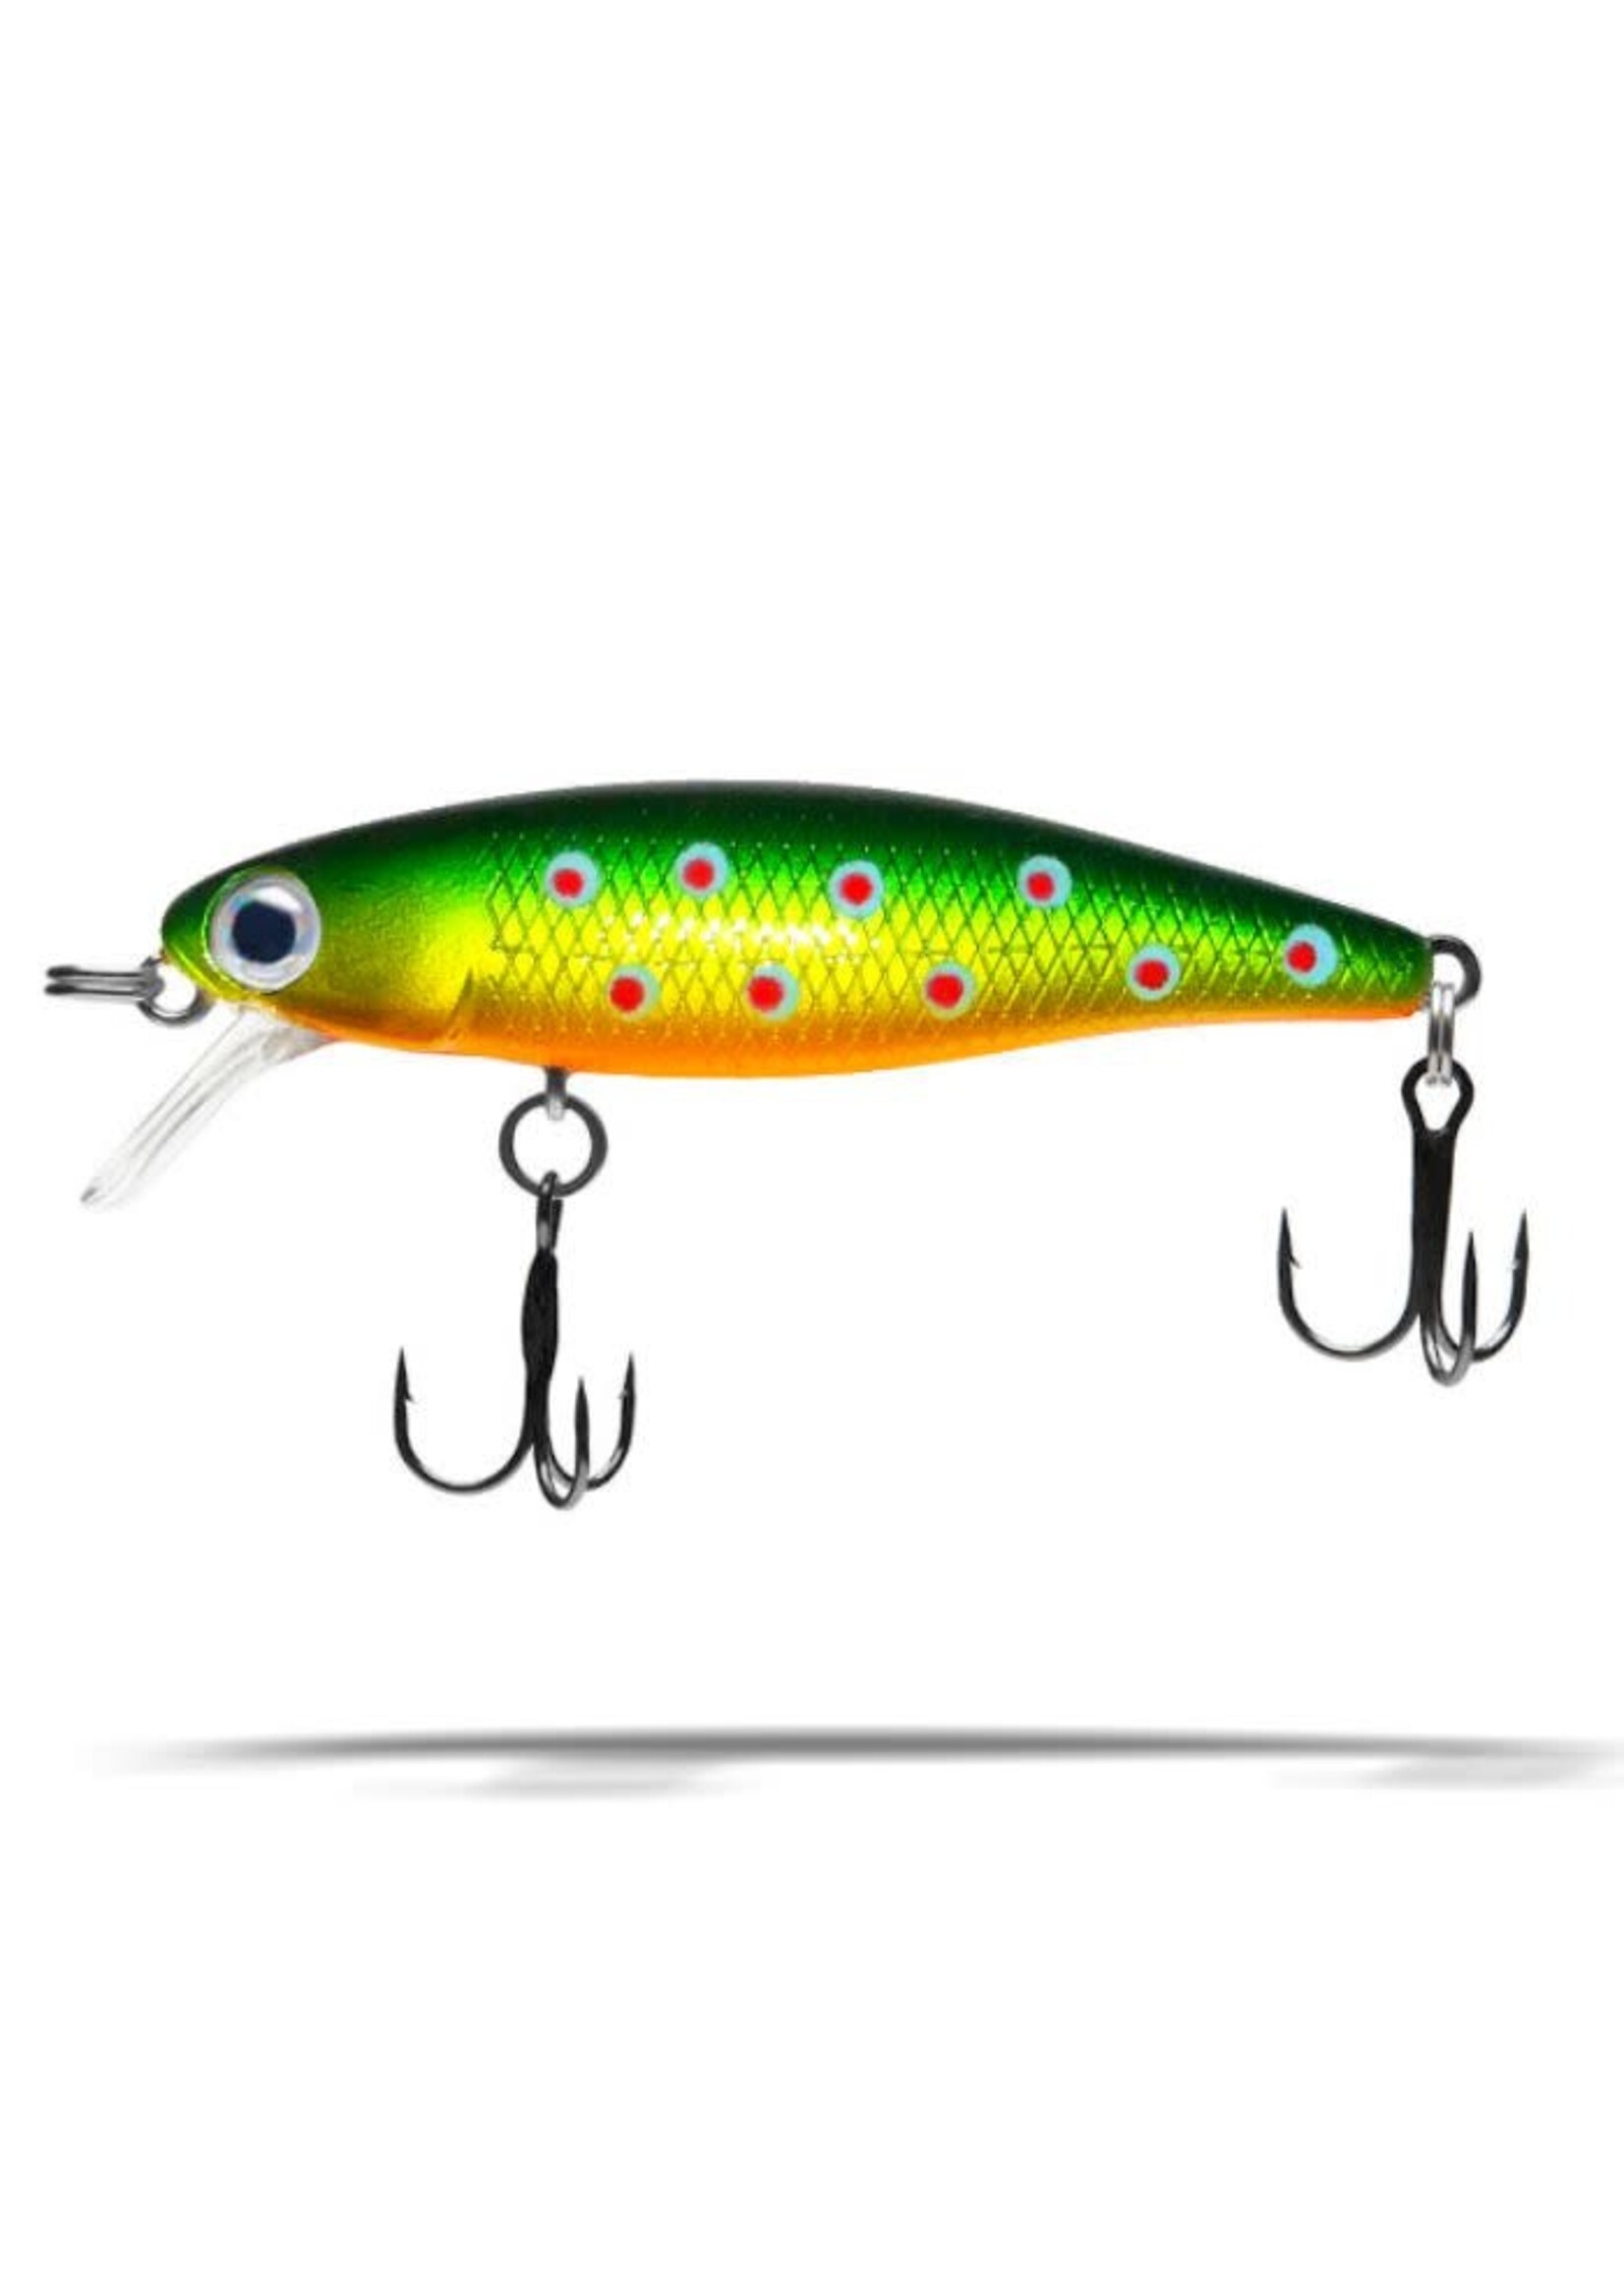 Lake Trout Lures Archives - Flashy Fish Lures